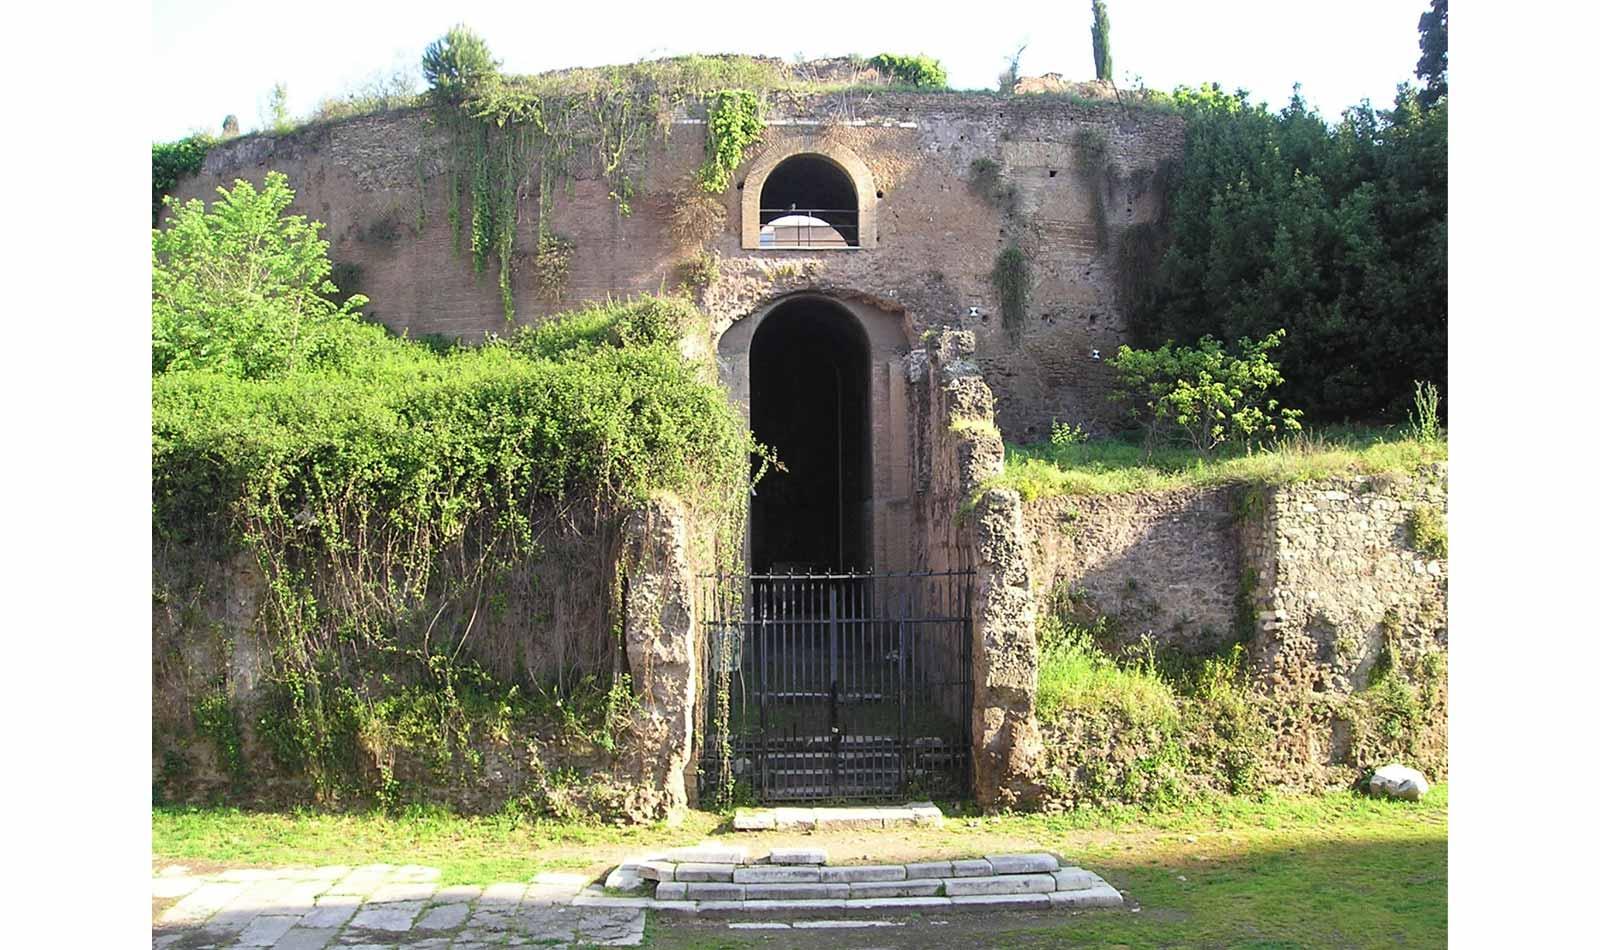 The Mausoleum of Augustus, 'liberated' from surrounding structures.